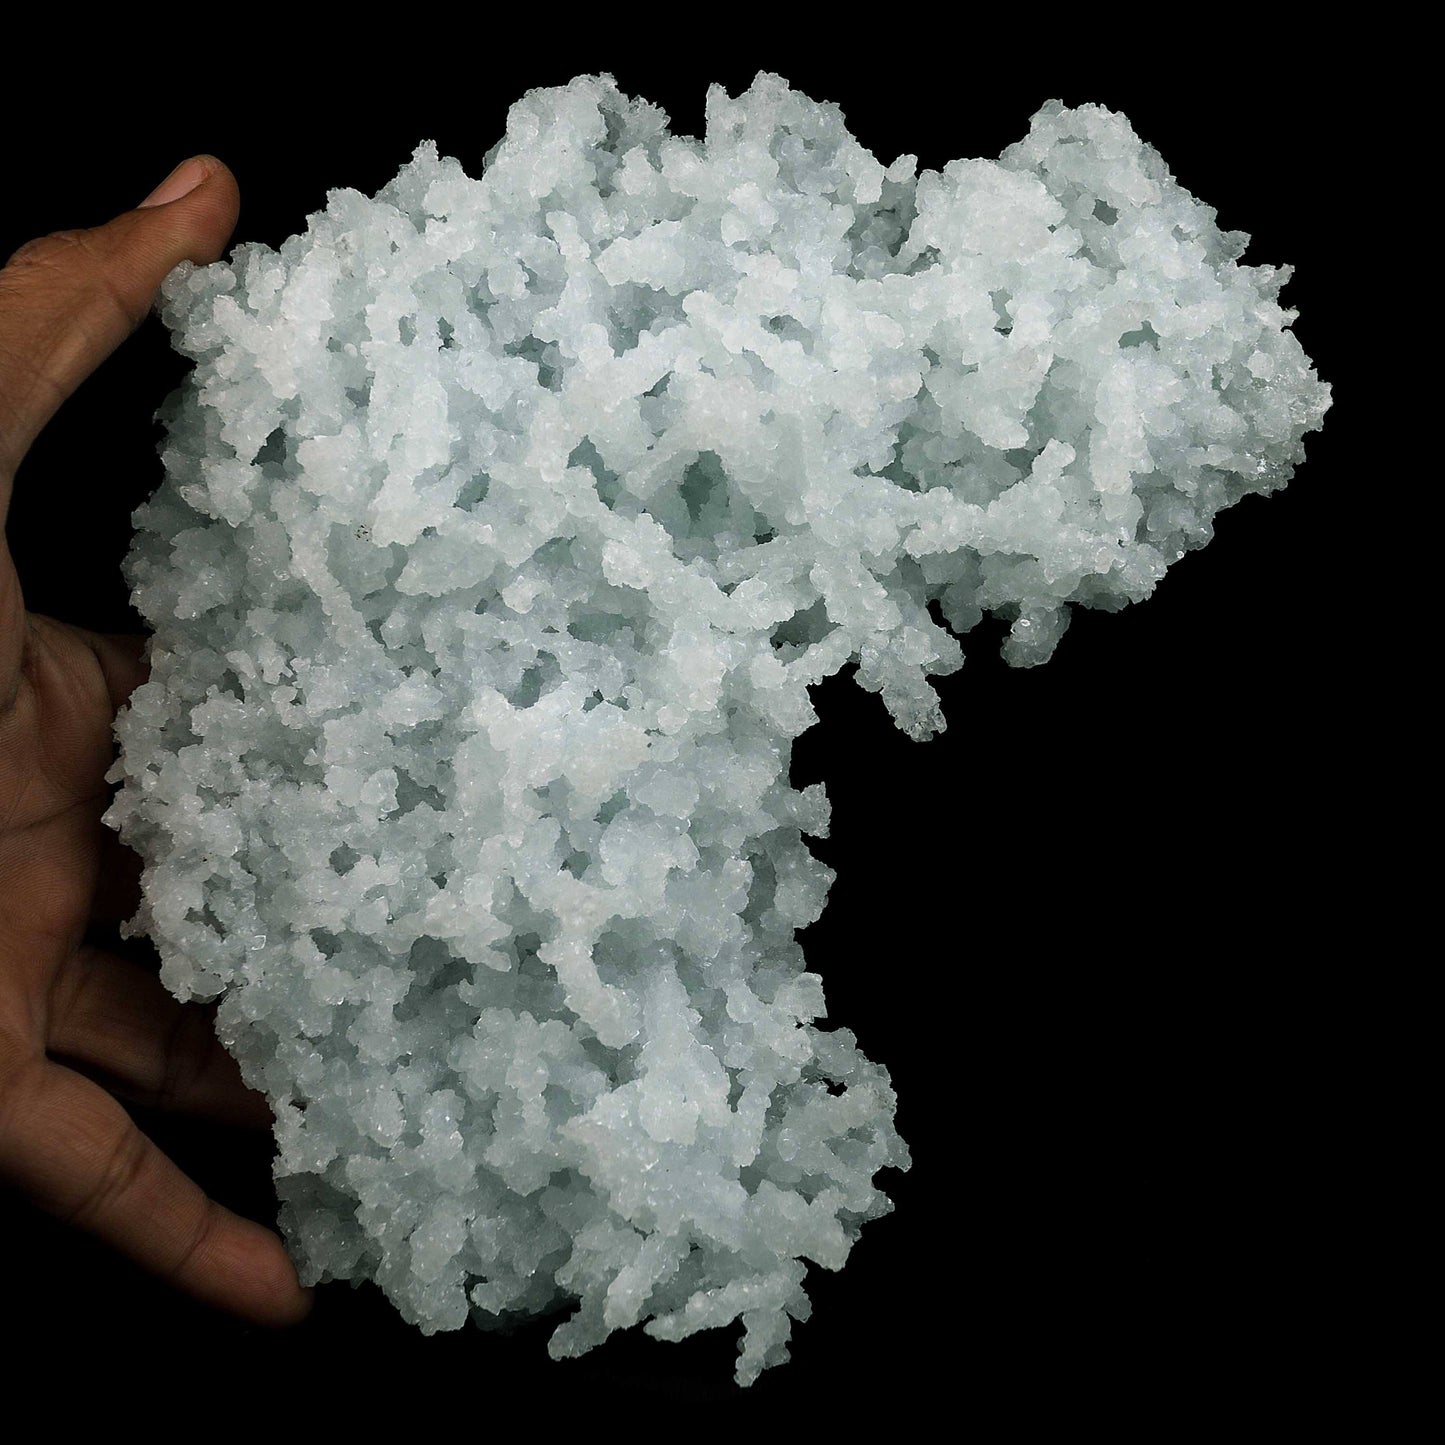 Prehnite Mesh Formation Natural Mineral Specimen # B 4545  https://www.superbminerals.us/products/prehnite-mesh-formation-natural-mineral-specimen-b-4545  Features:Prestigious jackstraw cluster of elongated laumontite crystals pseudomorphed from mint-green, transparent prehnite crystals. Malad Quarry in Mumbai is a well-known source of classic and outstanding antique material. Population increase forced the closure of the quarry in the last 20-30 years.